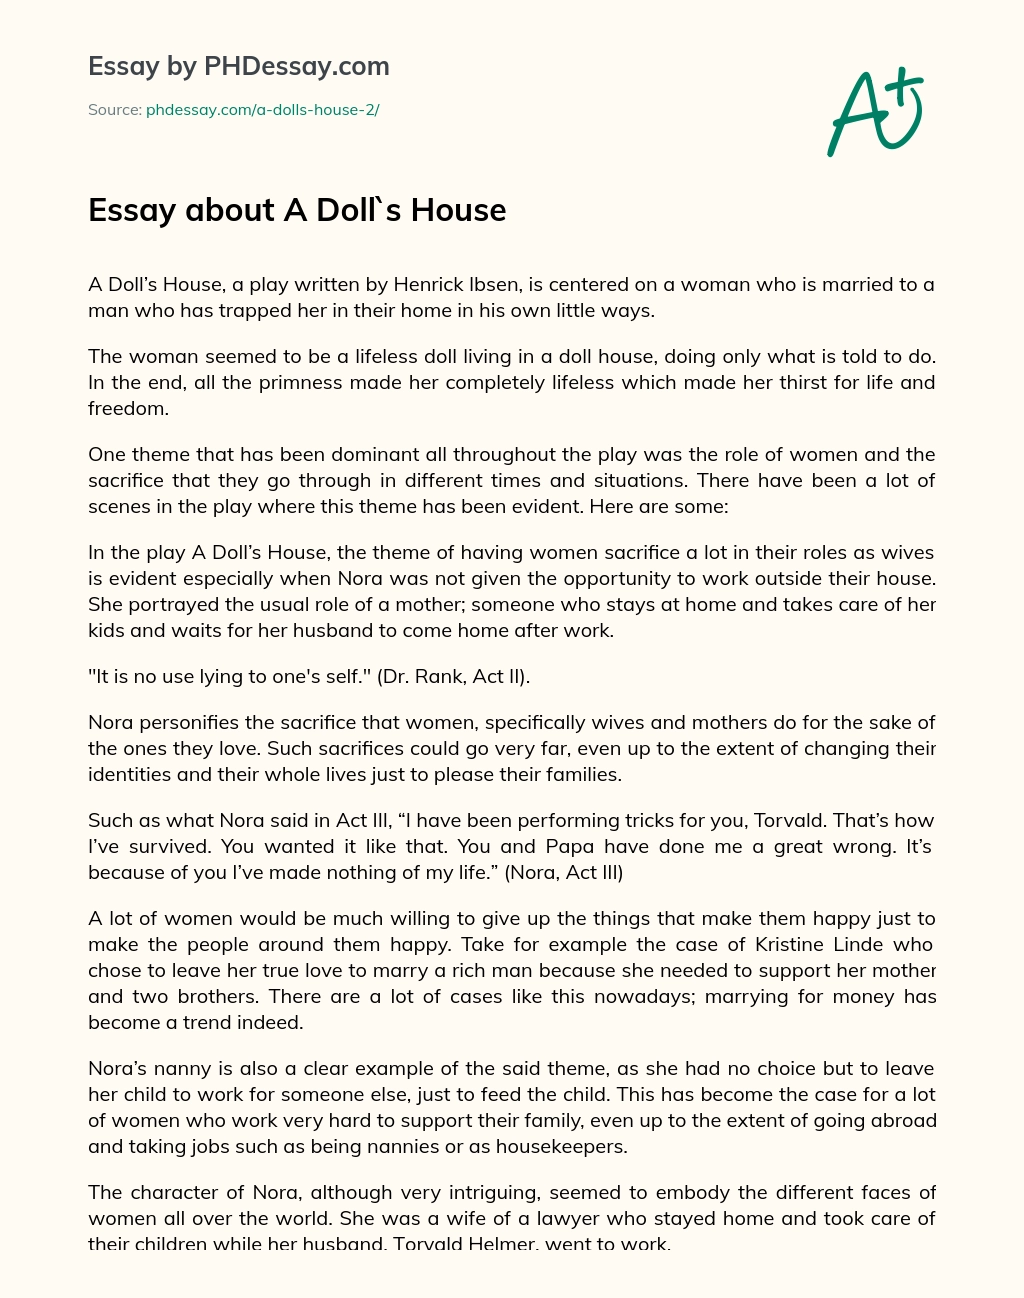 thesis statement for a dolls house